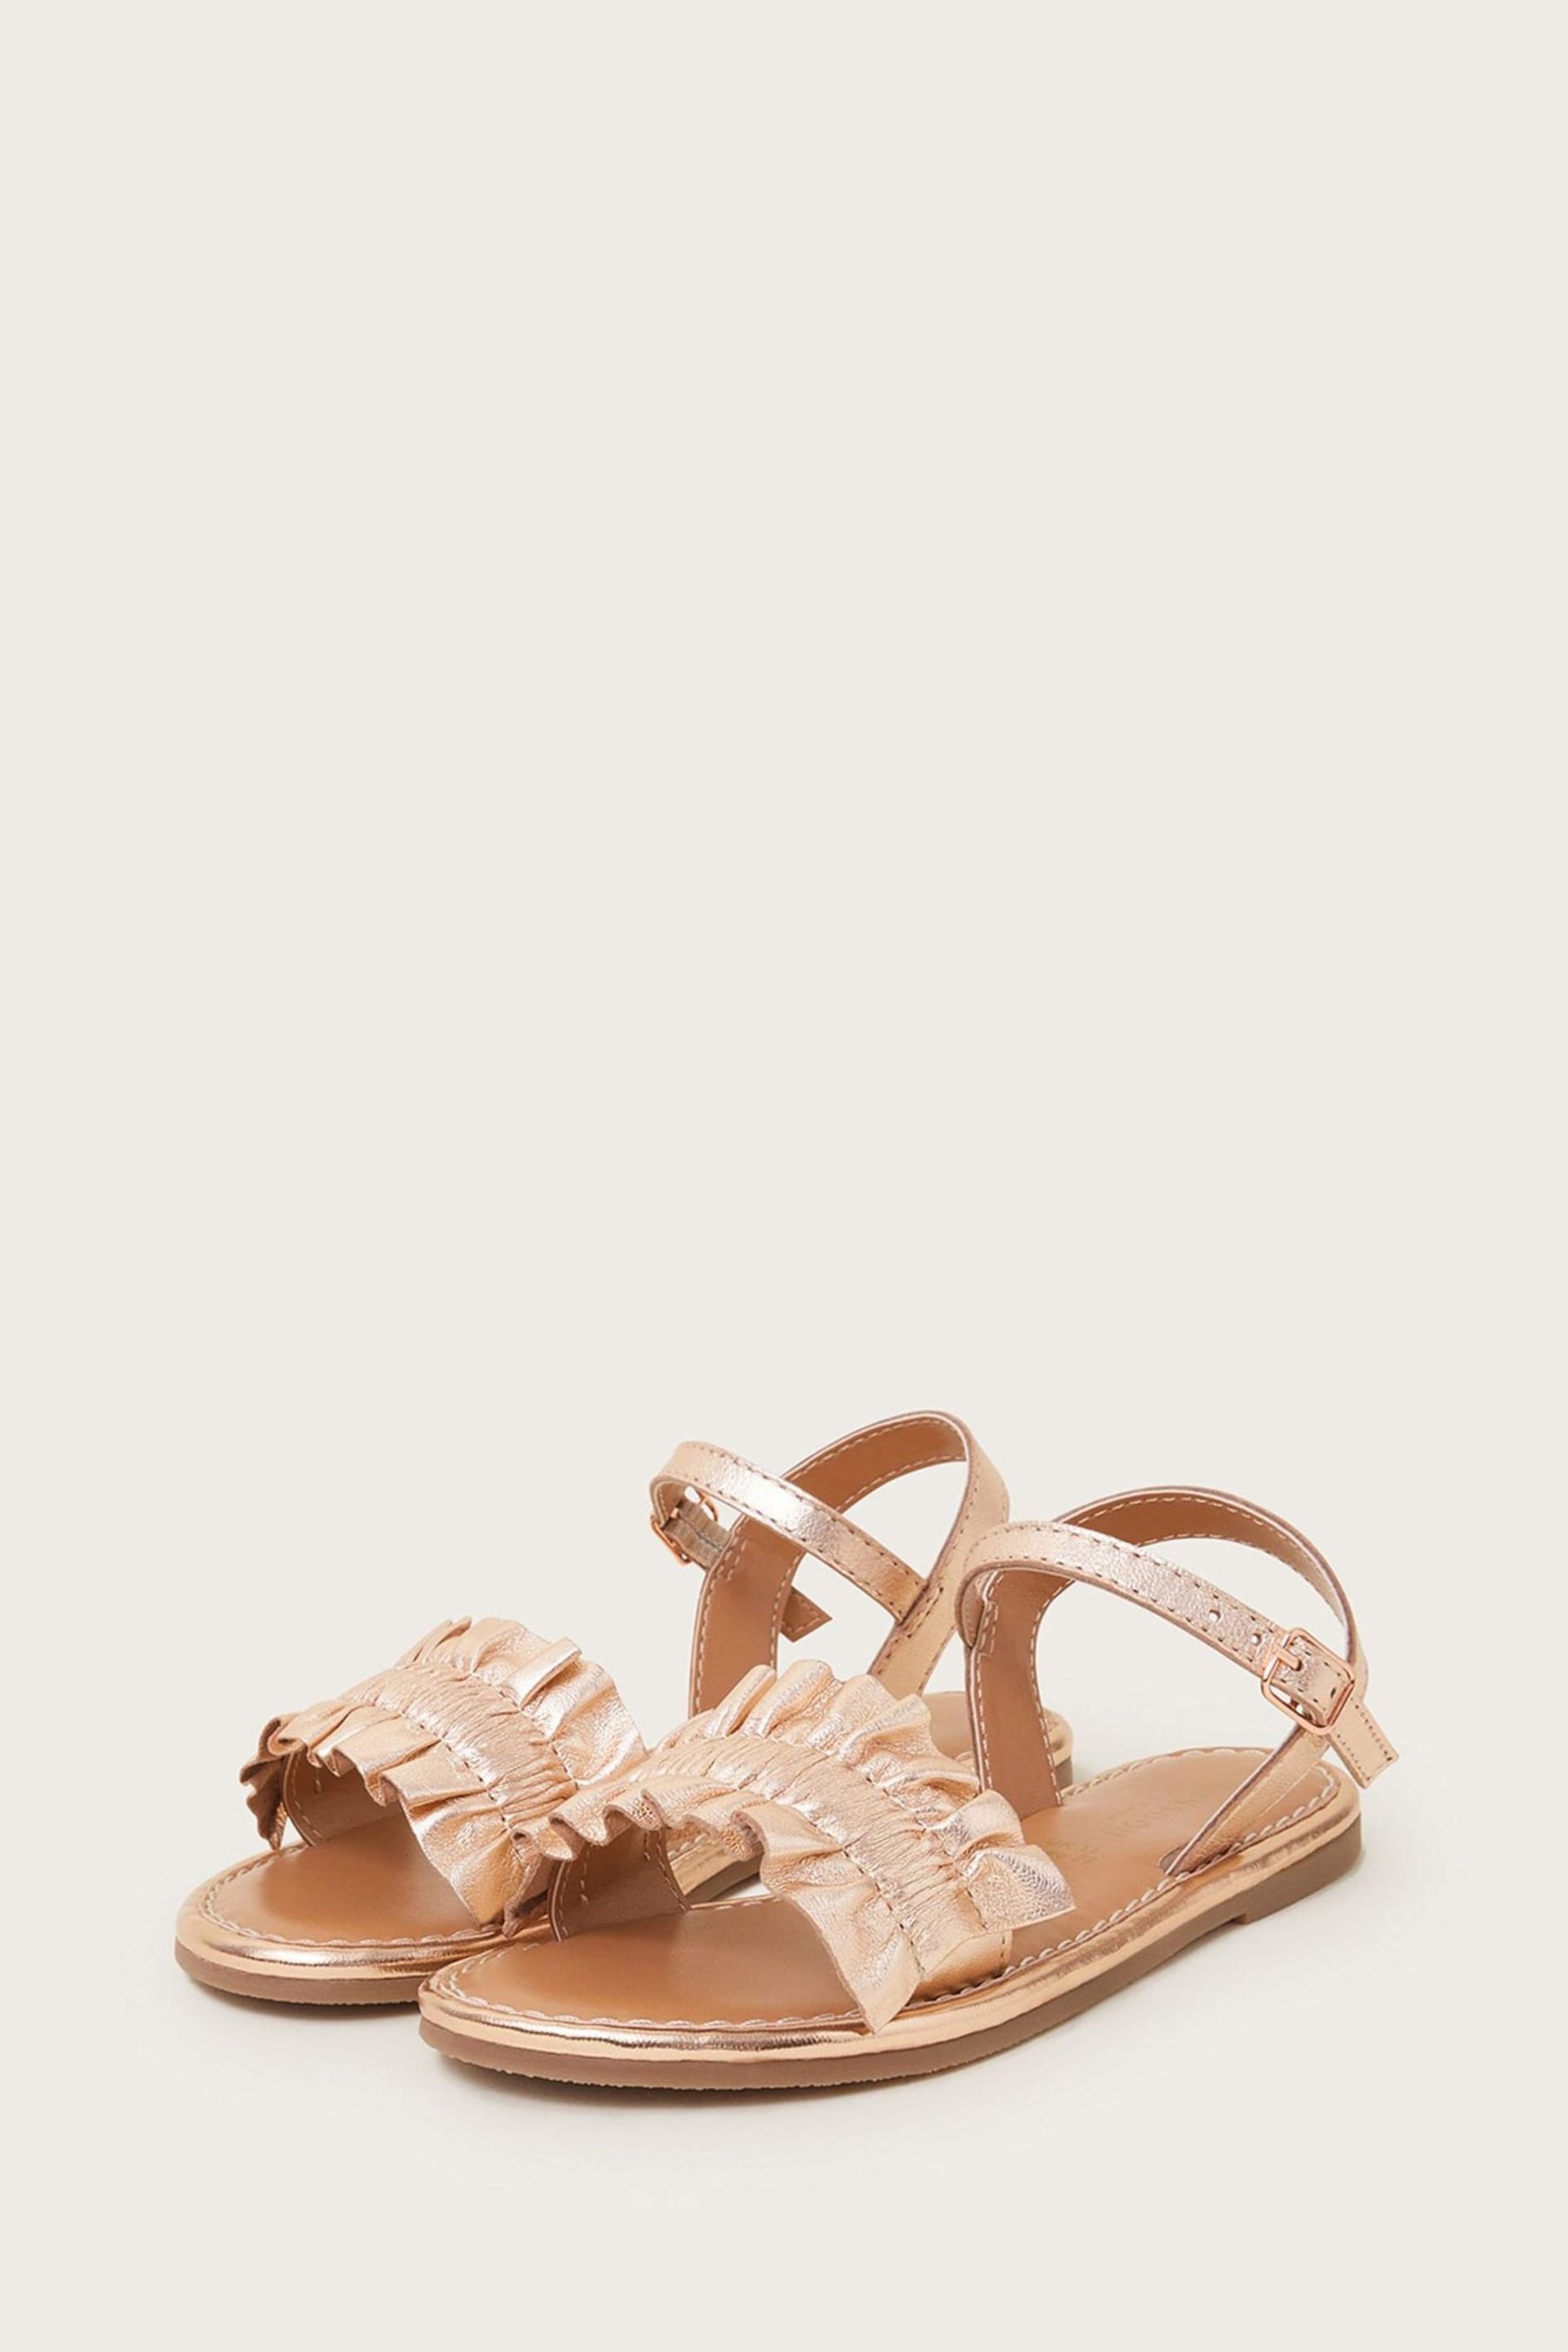 Monsoon Gold Frill Leather Sandals - Image 1 of 3